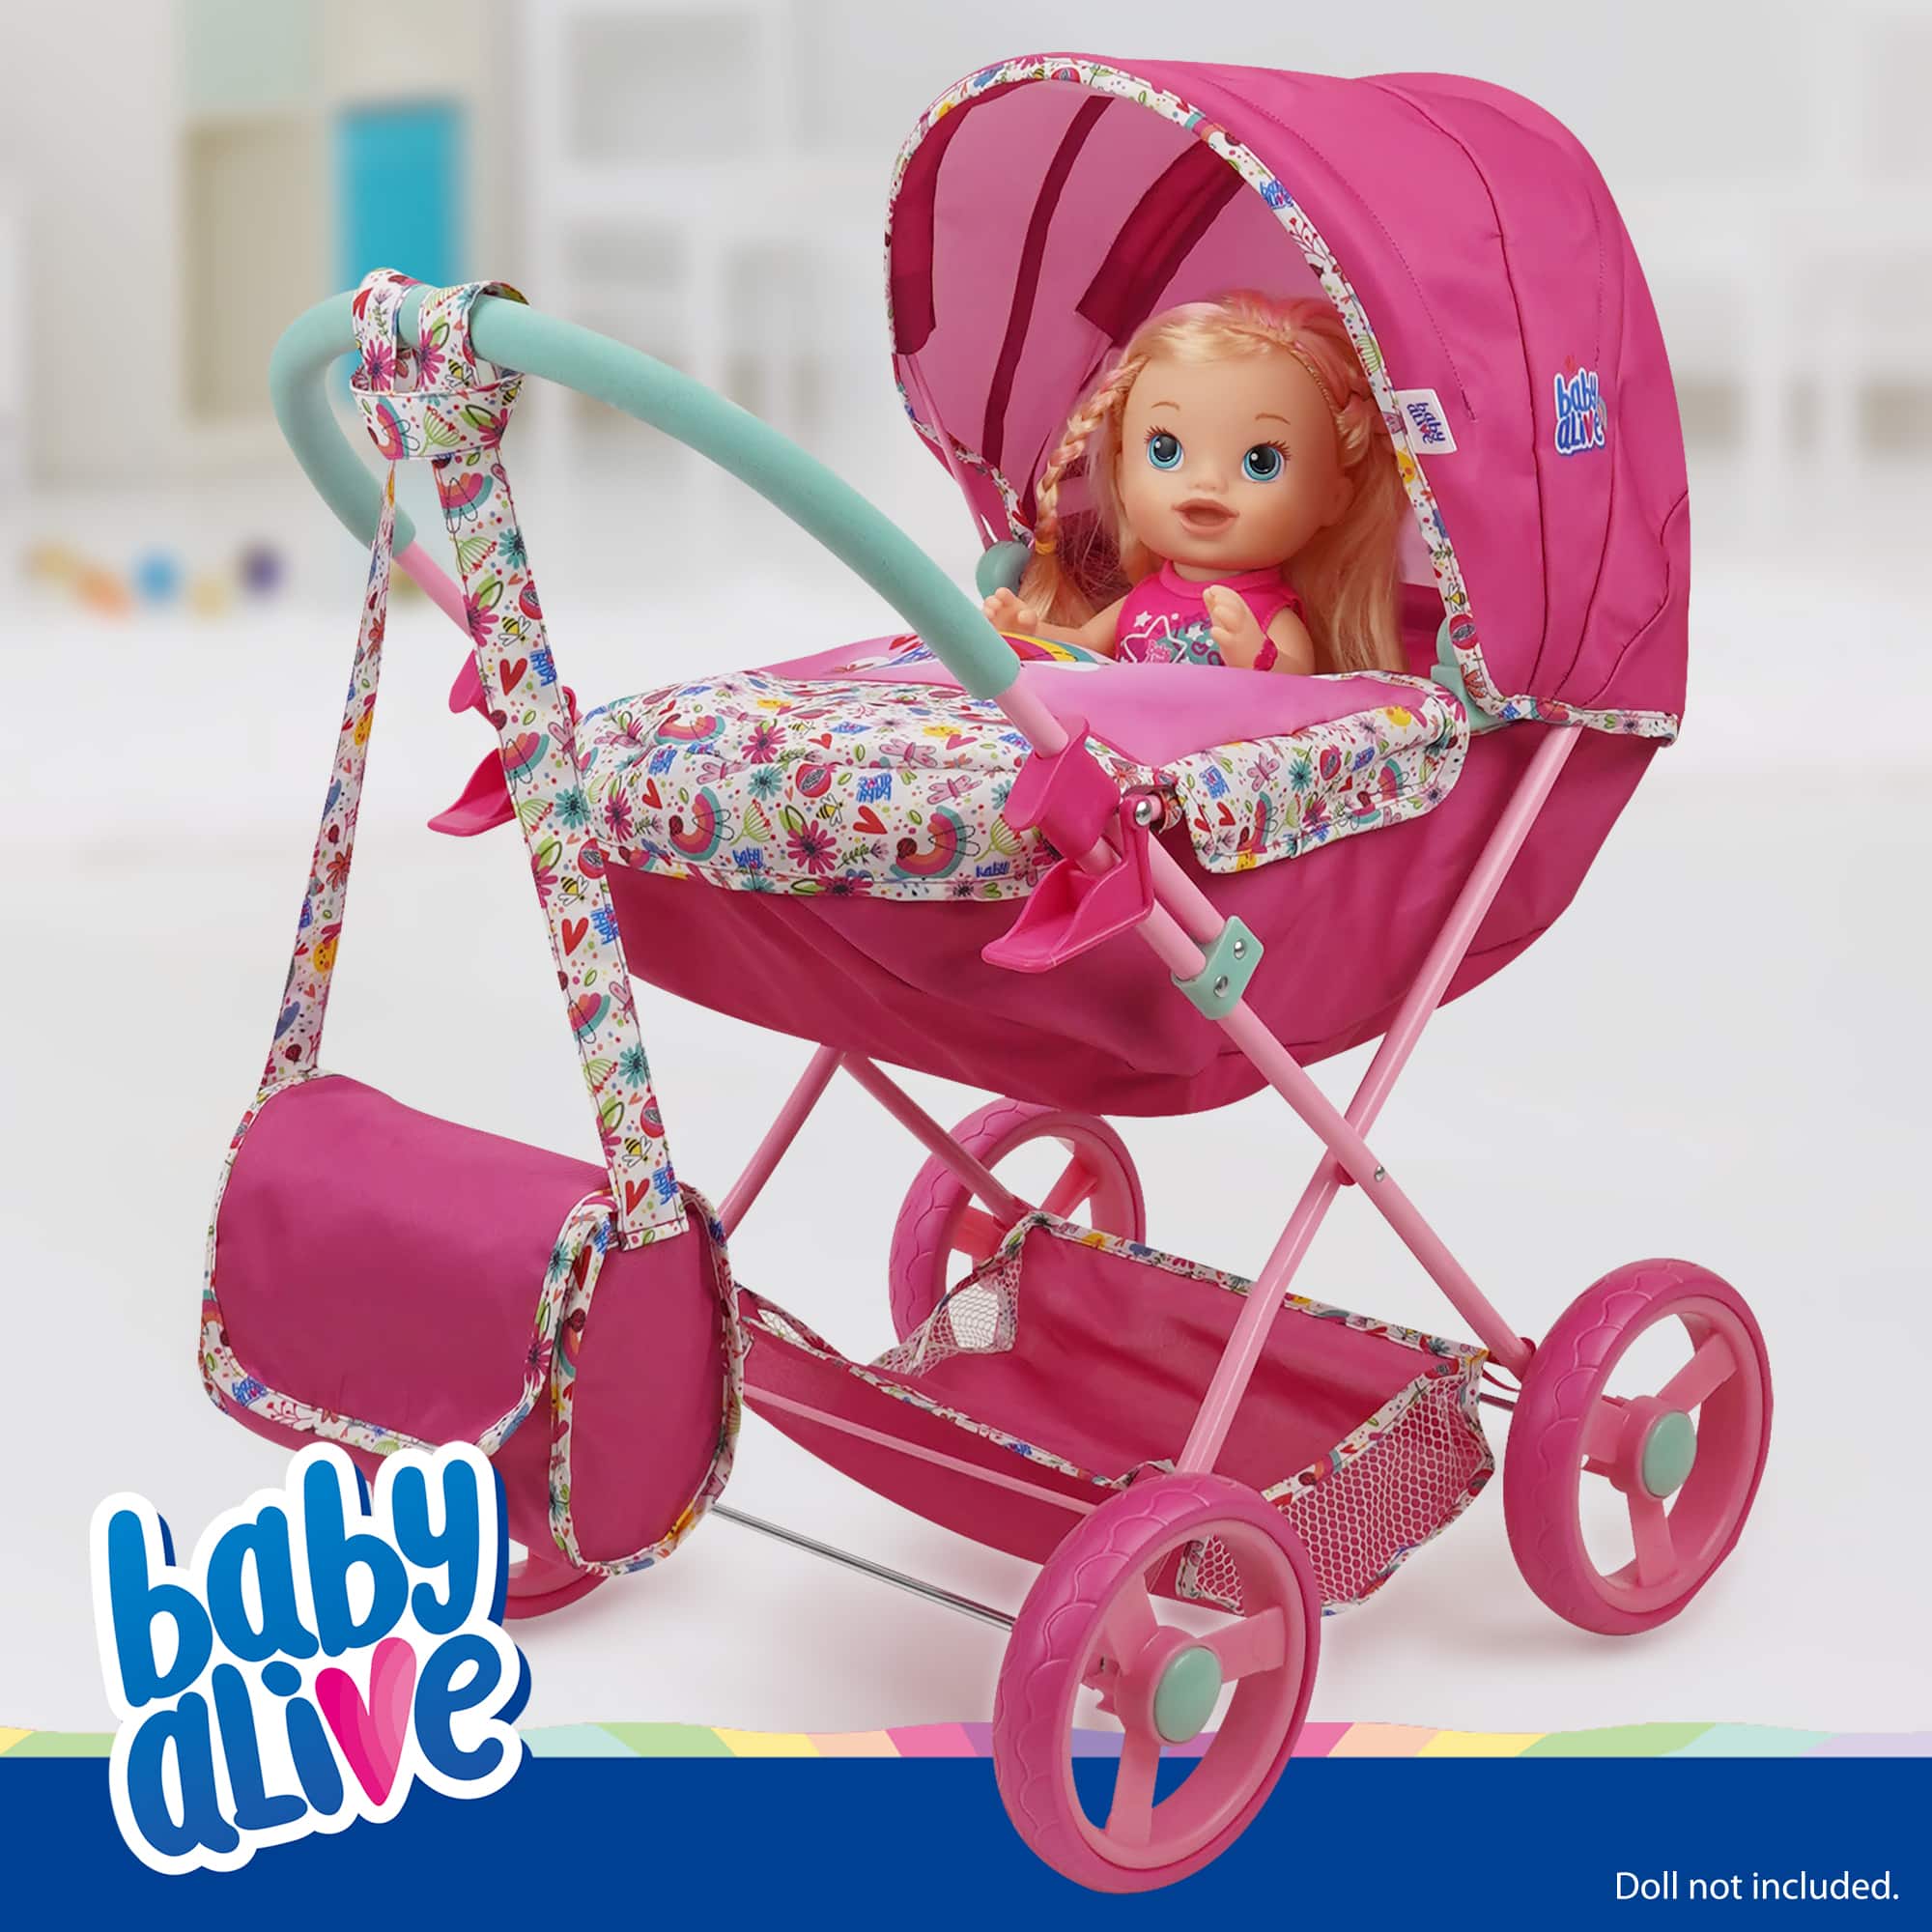 509 Crew Baby Alive Pink and Rainbow Deluxe Classic Doll Pram